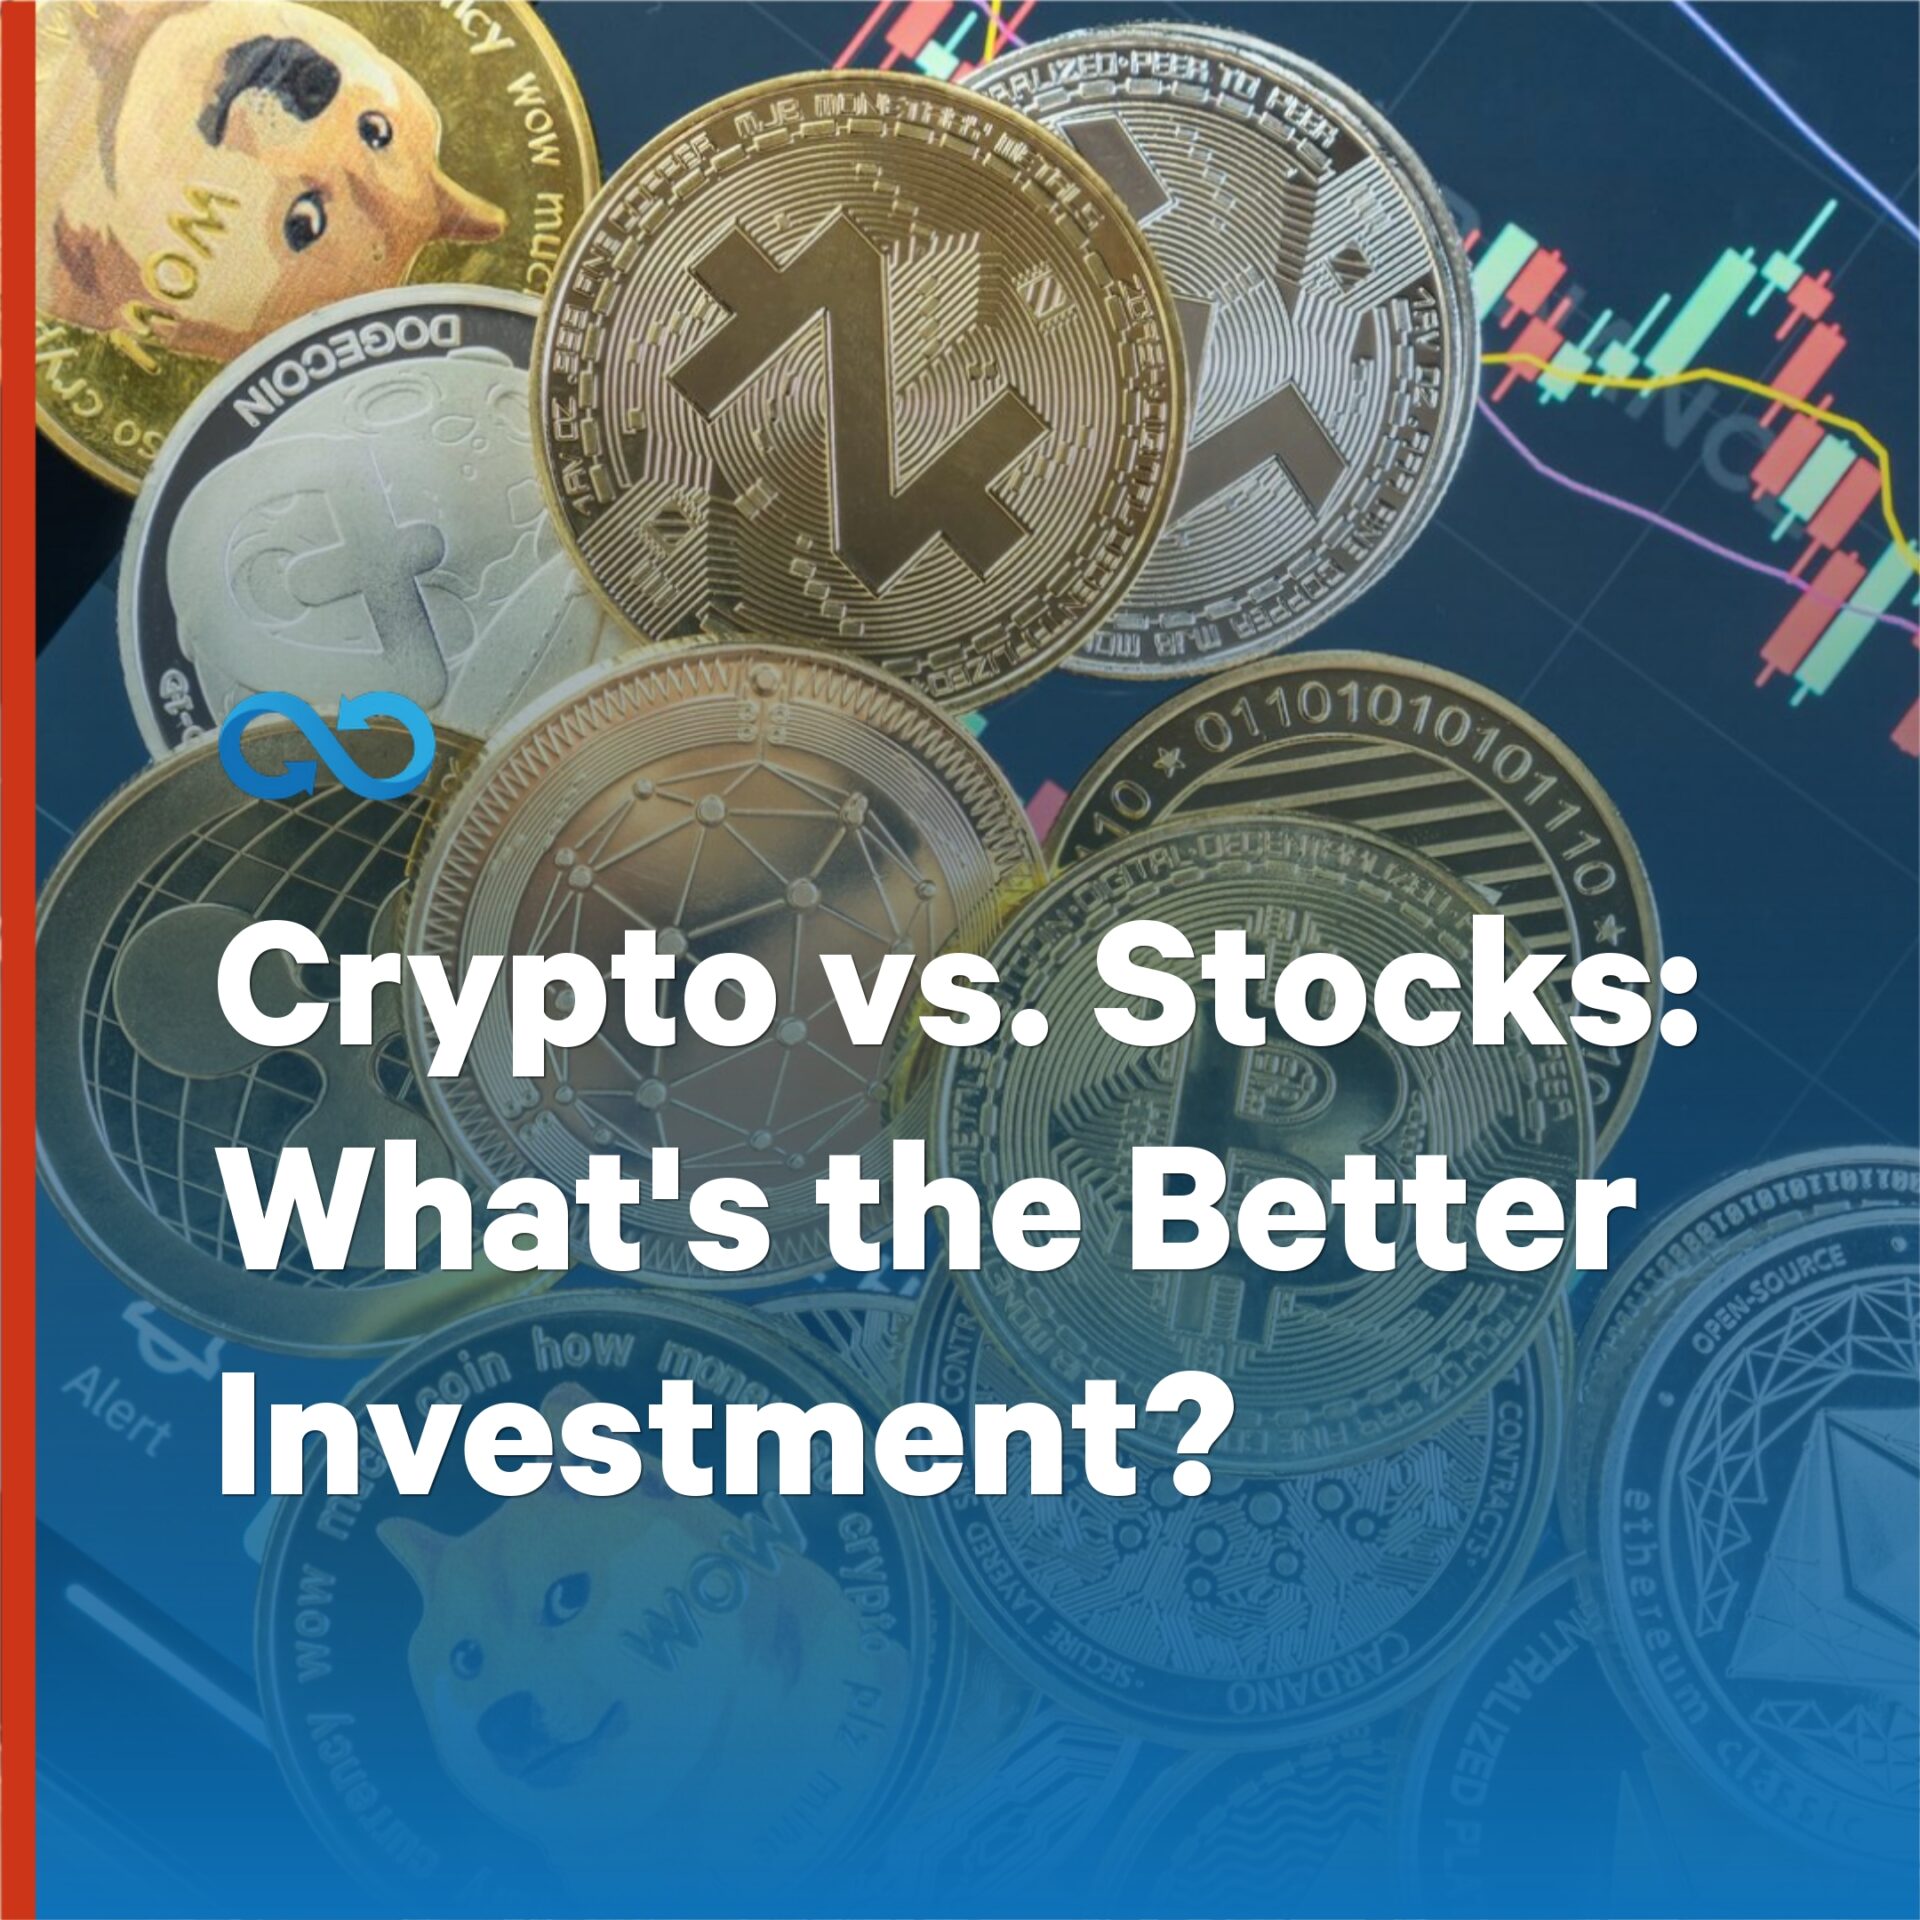 Crypto vs. Stocks: Which is Better?